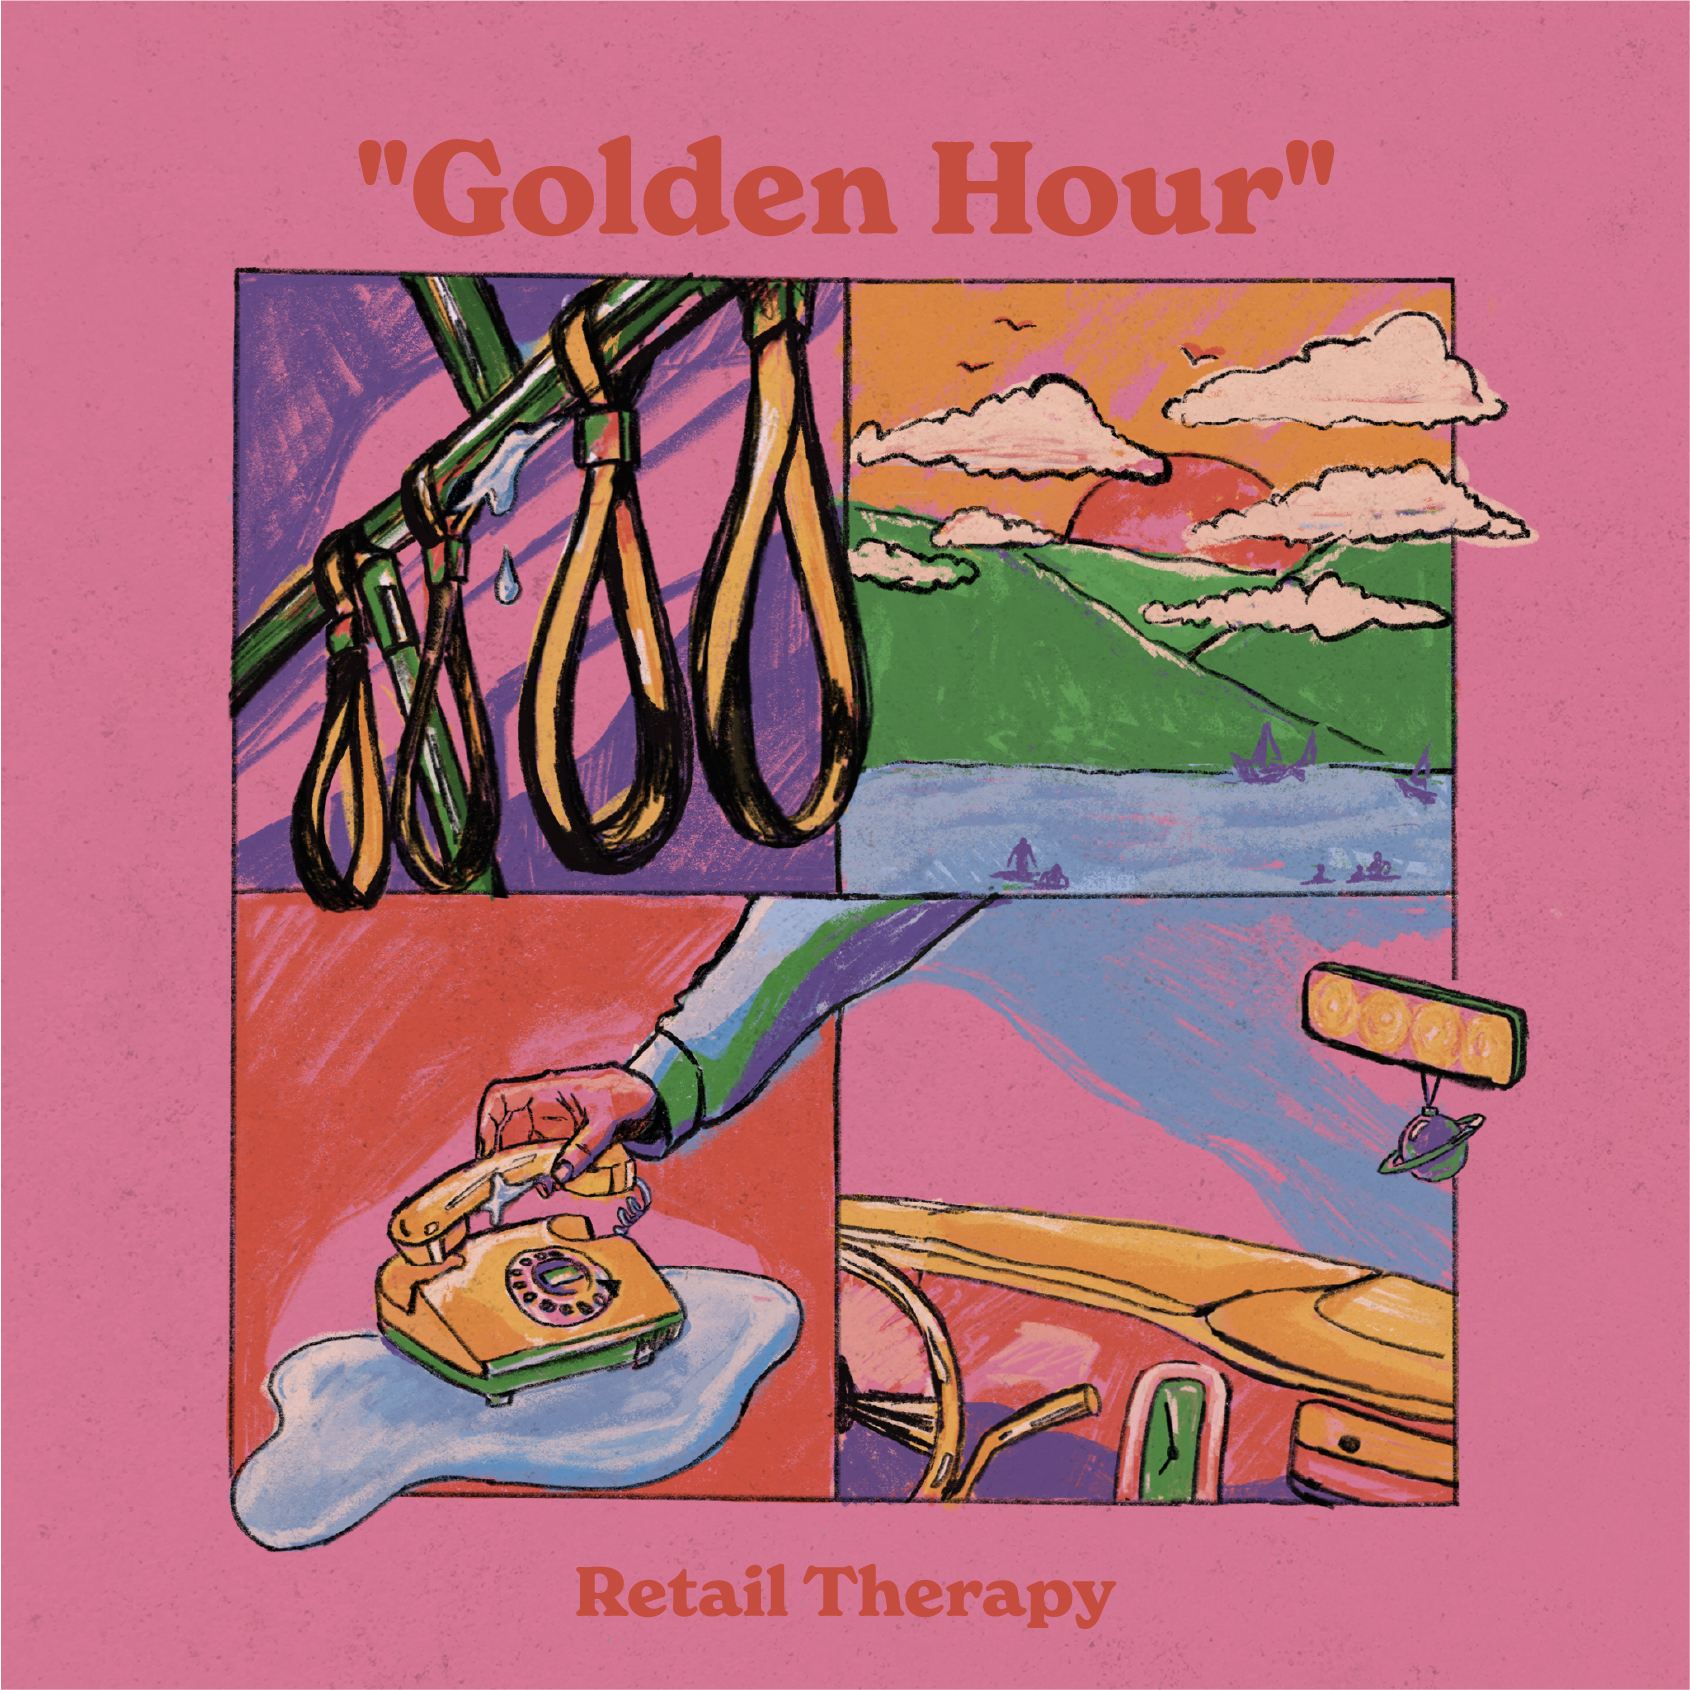 "Golden Hour" by Retail Therapy - Album Art 